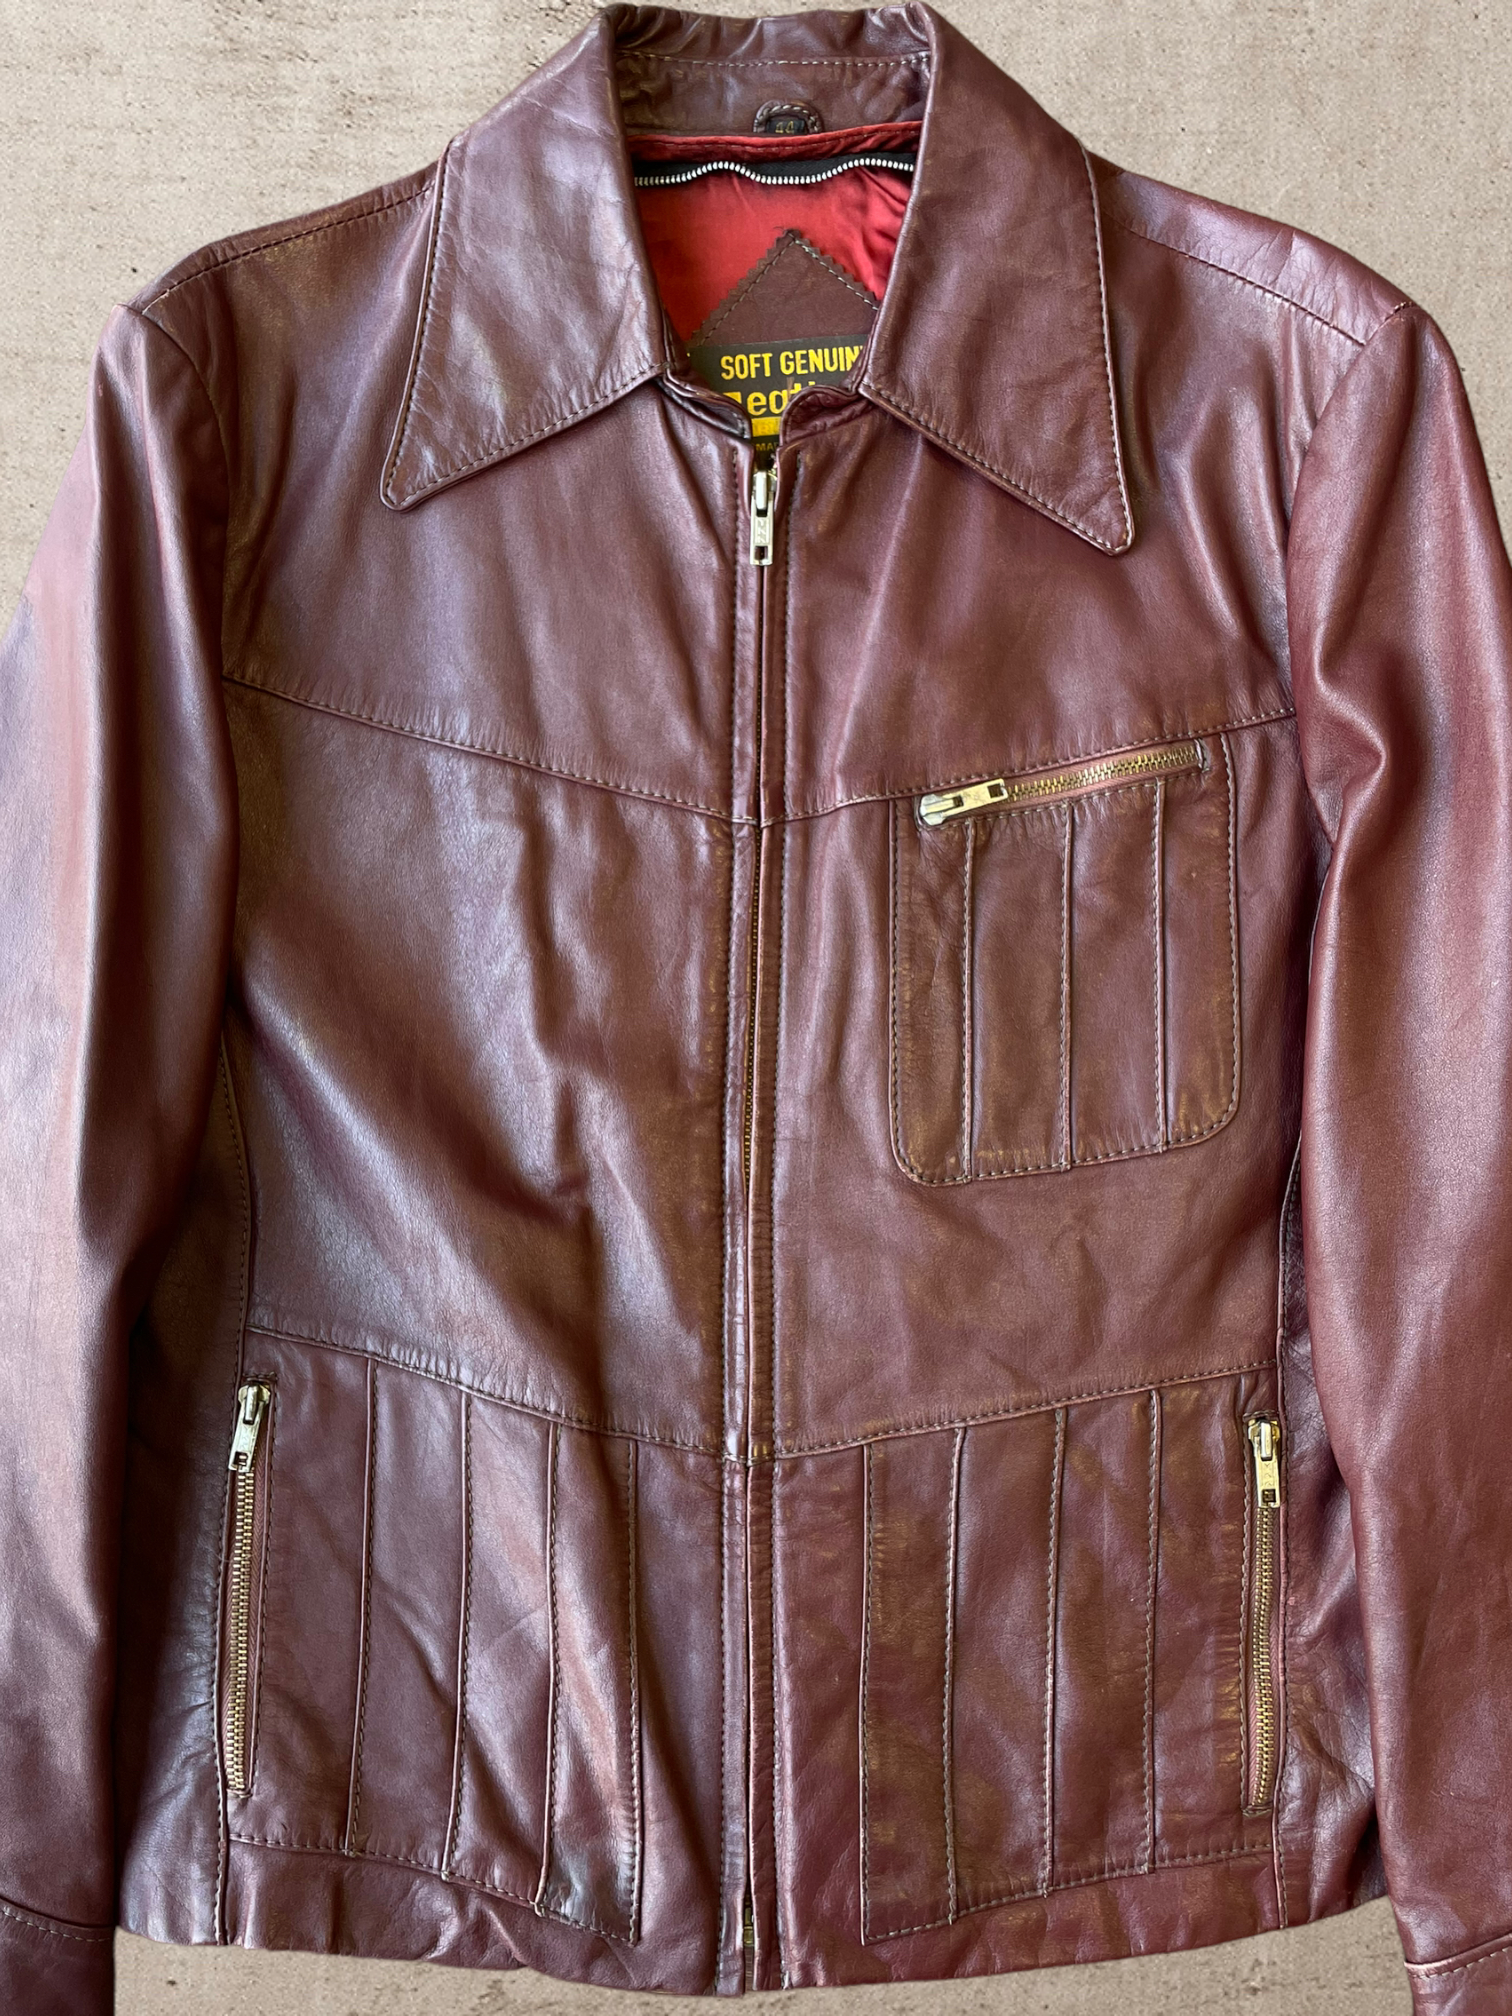 70s/80s Cowhide Leather Jacket - Large